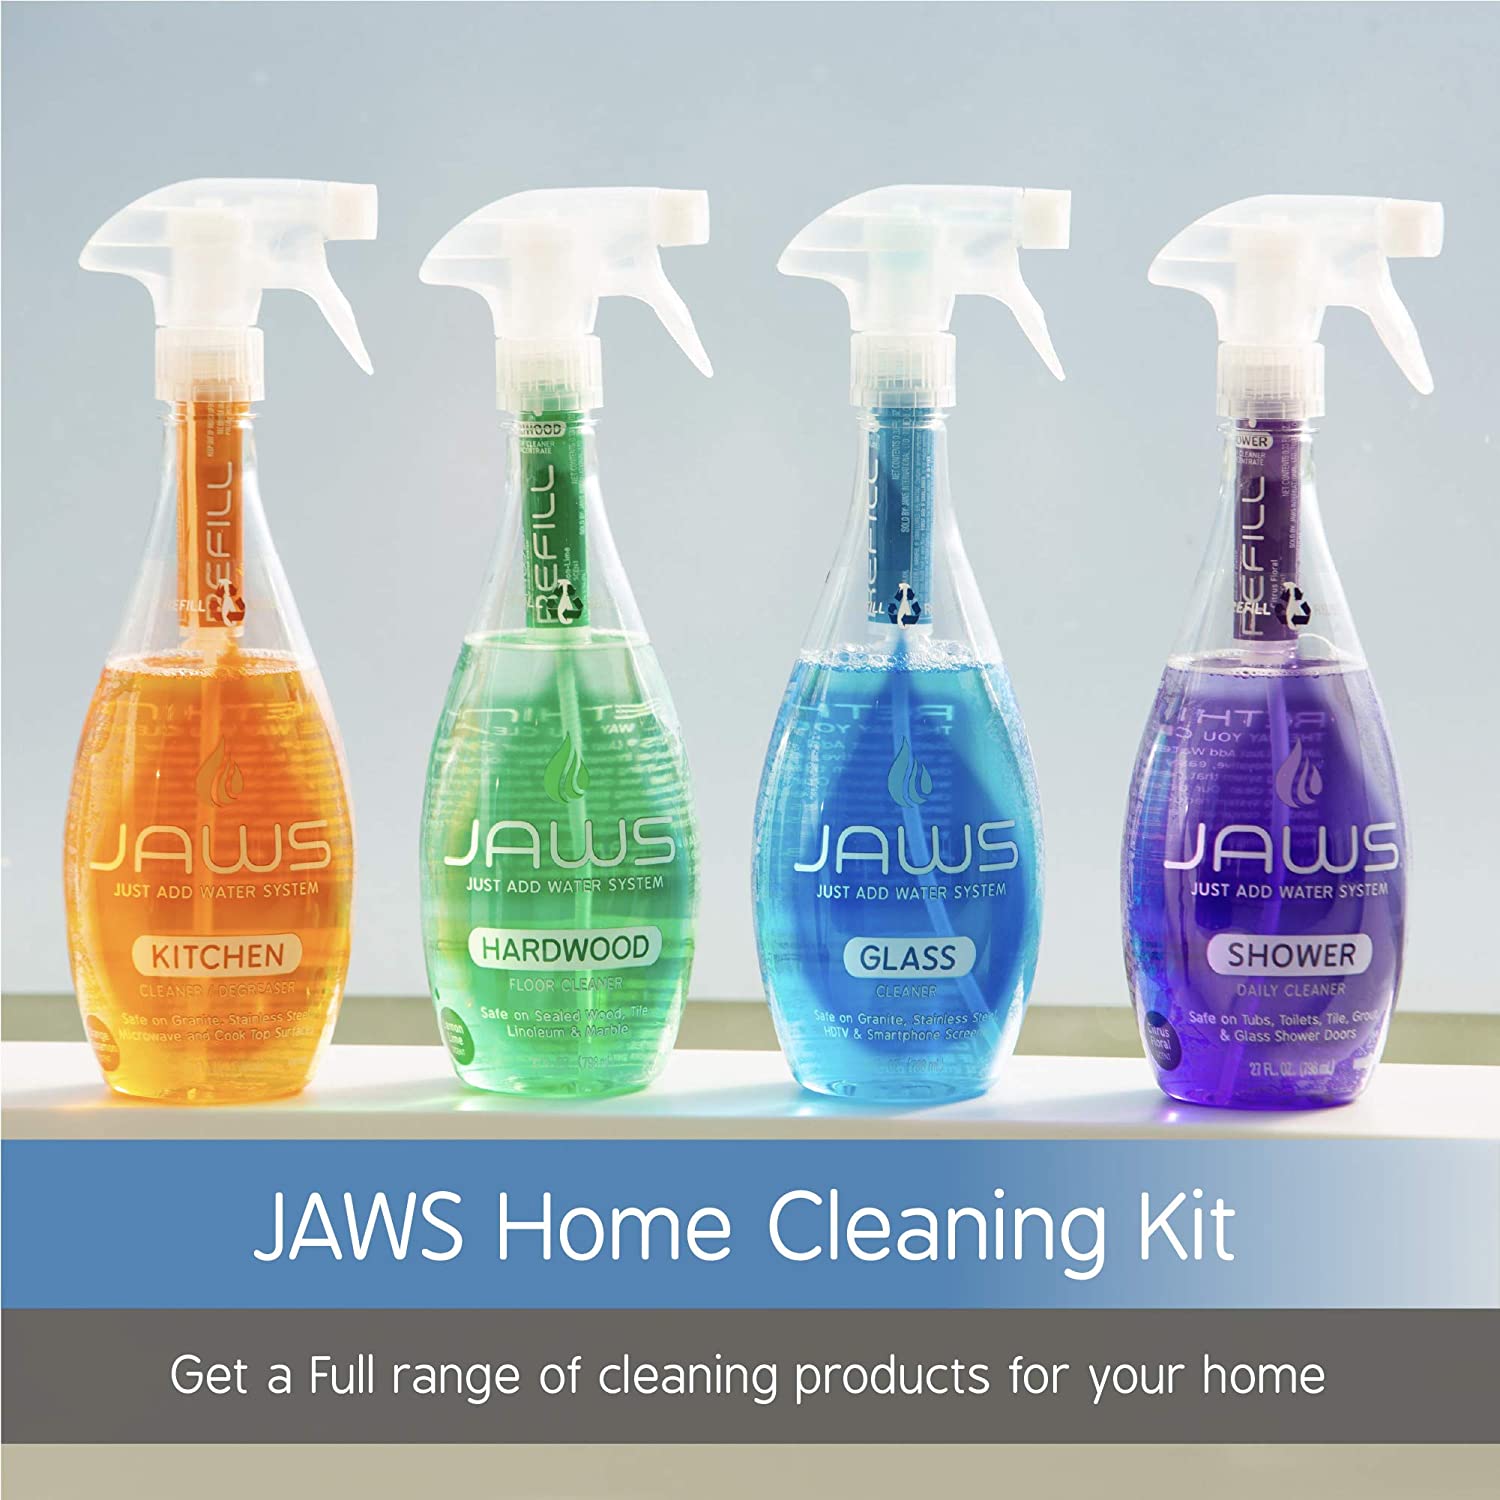 Jaws Kitchen Cleaner Refill Pack. Includes 2 Refill Pods. Non-Toxic